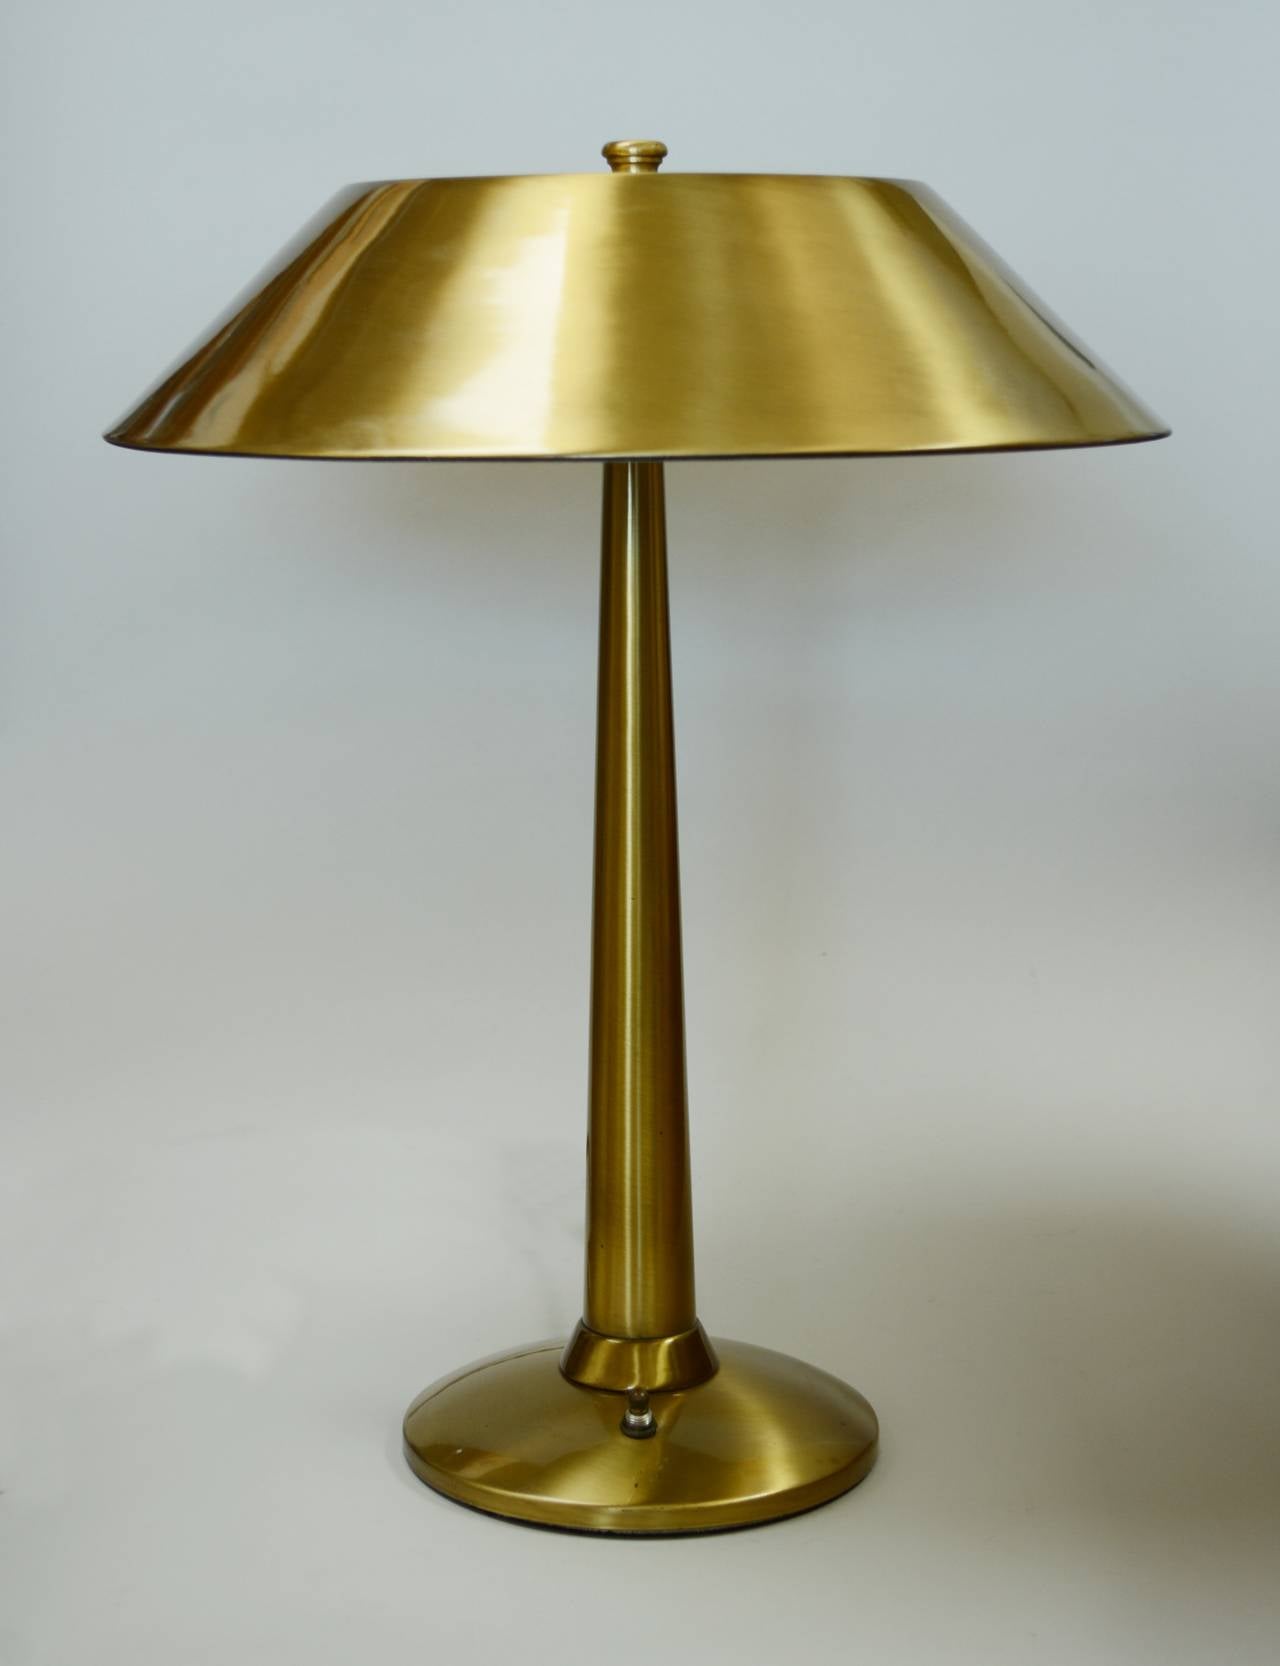 Desk lamp by National Lighting Company. The brass is a brushed finish. This lamp has two light bulb sockets. The cord is new twisted brown rayon with a vintage style plug.